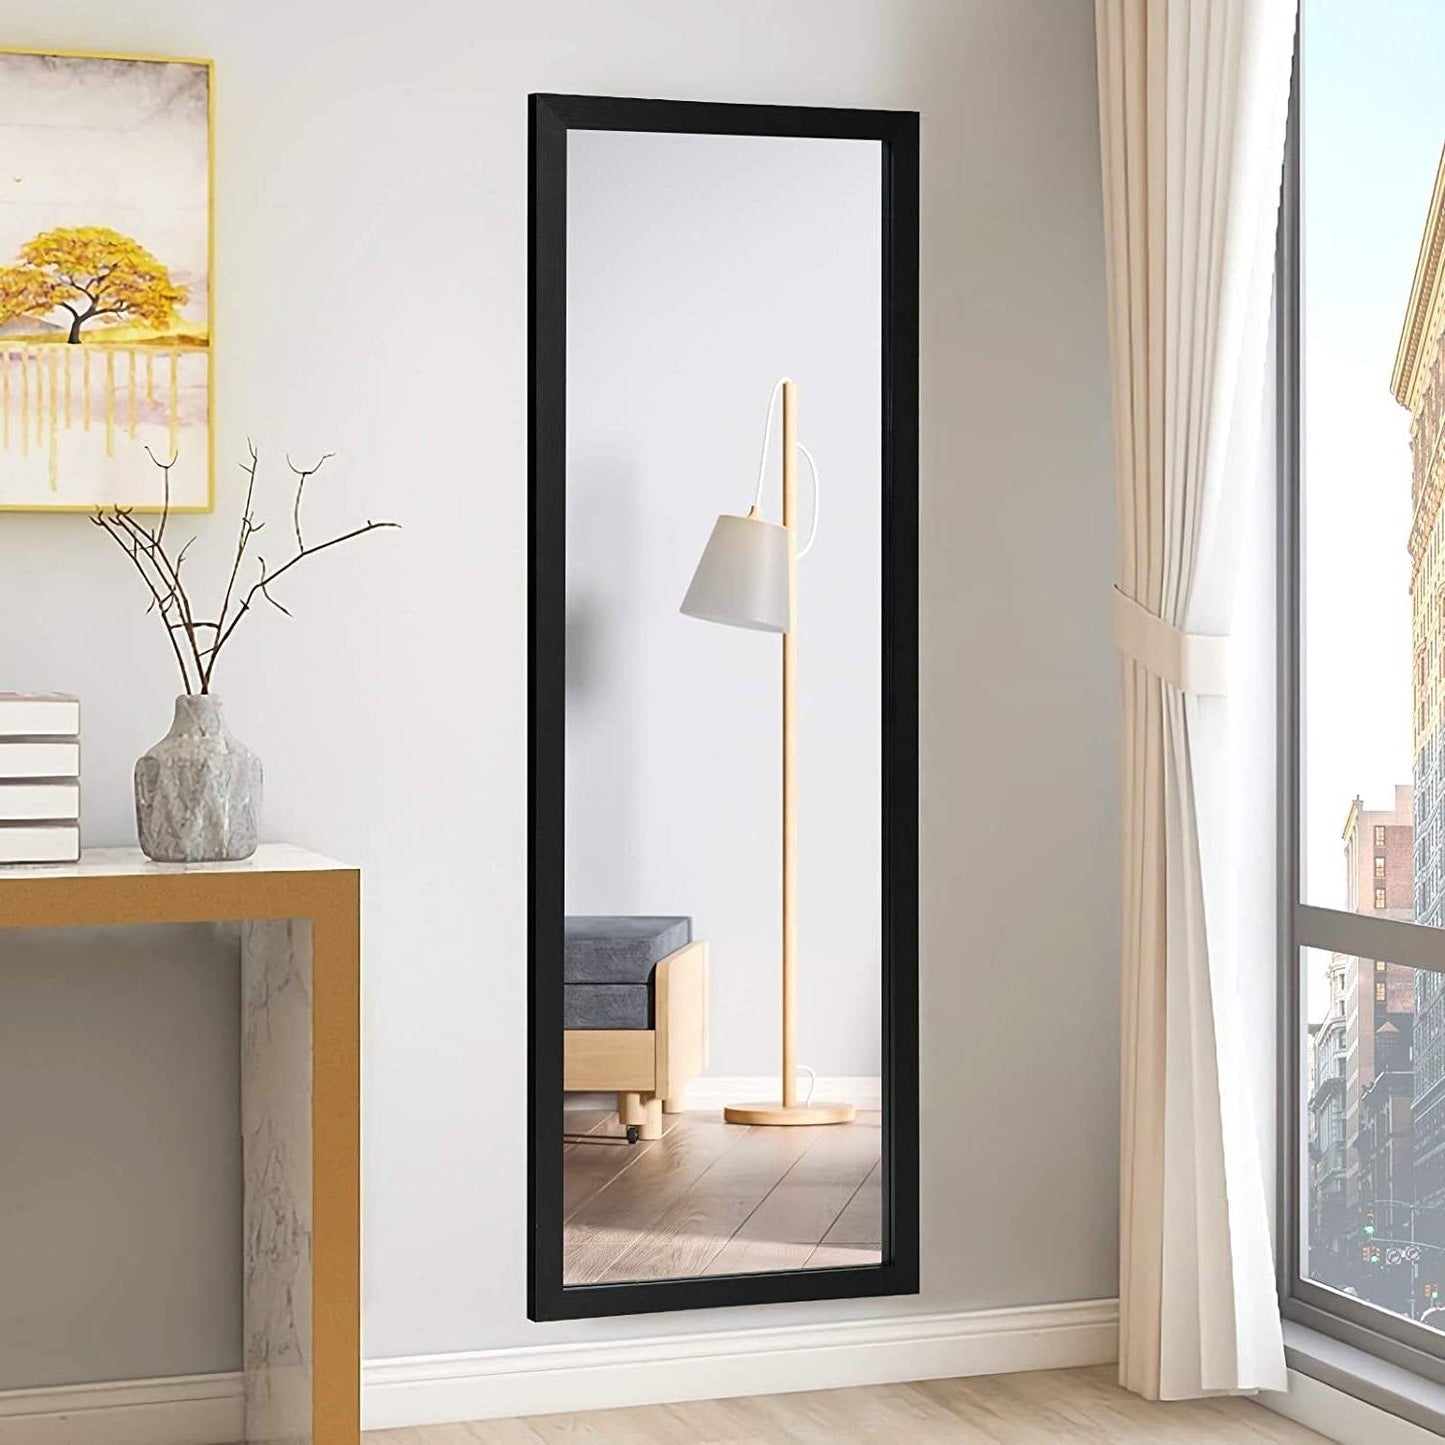 Accents > Mirrors - Black Full Length Bedroom Mirror With Over The Door Or Wall Mounted Design